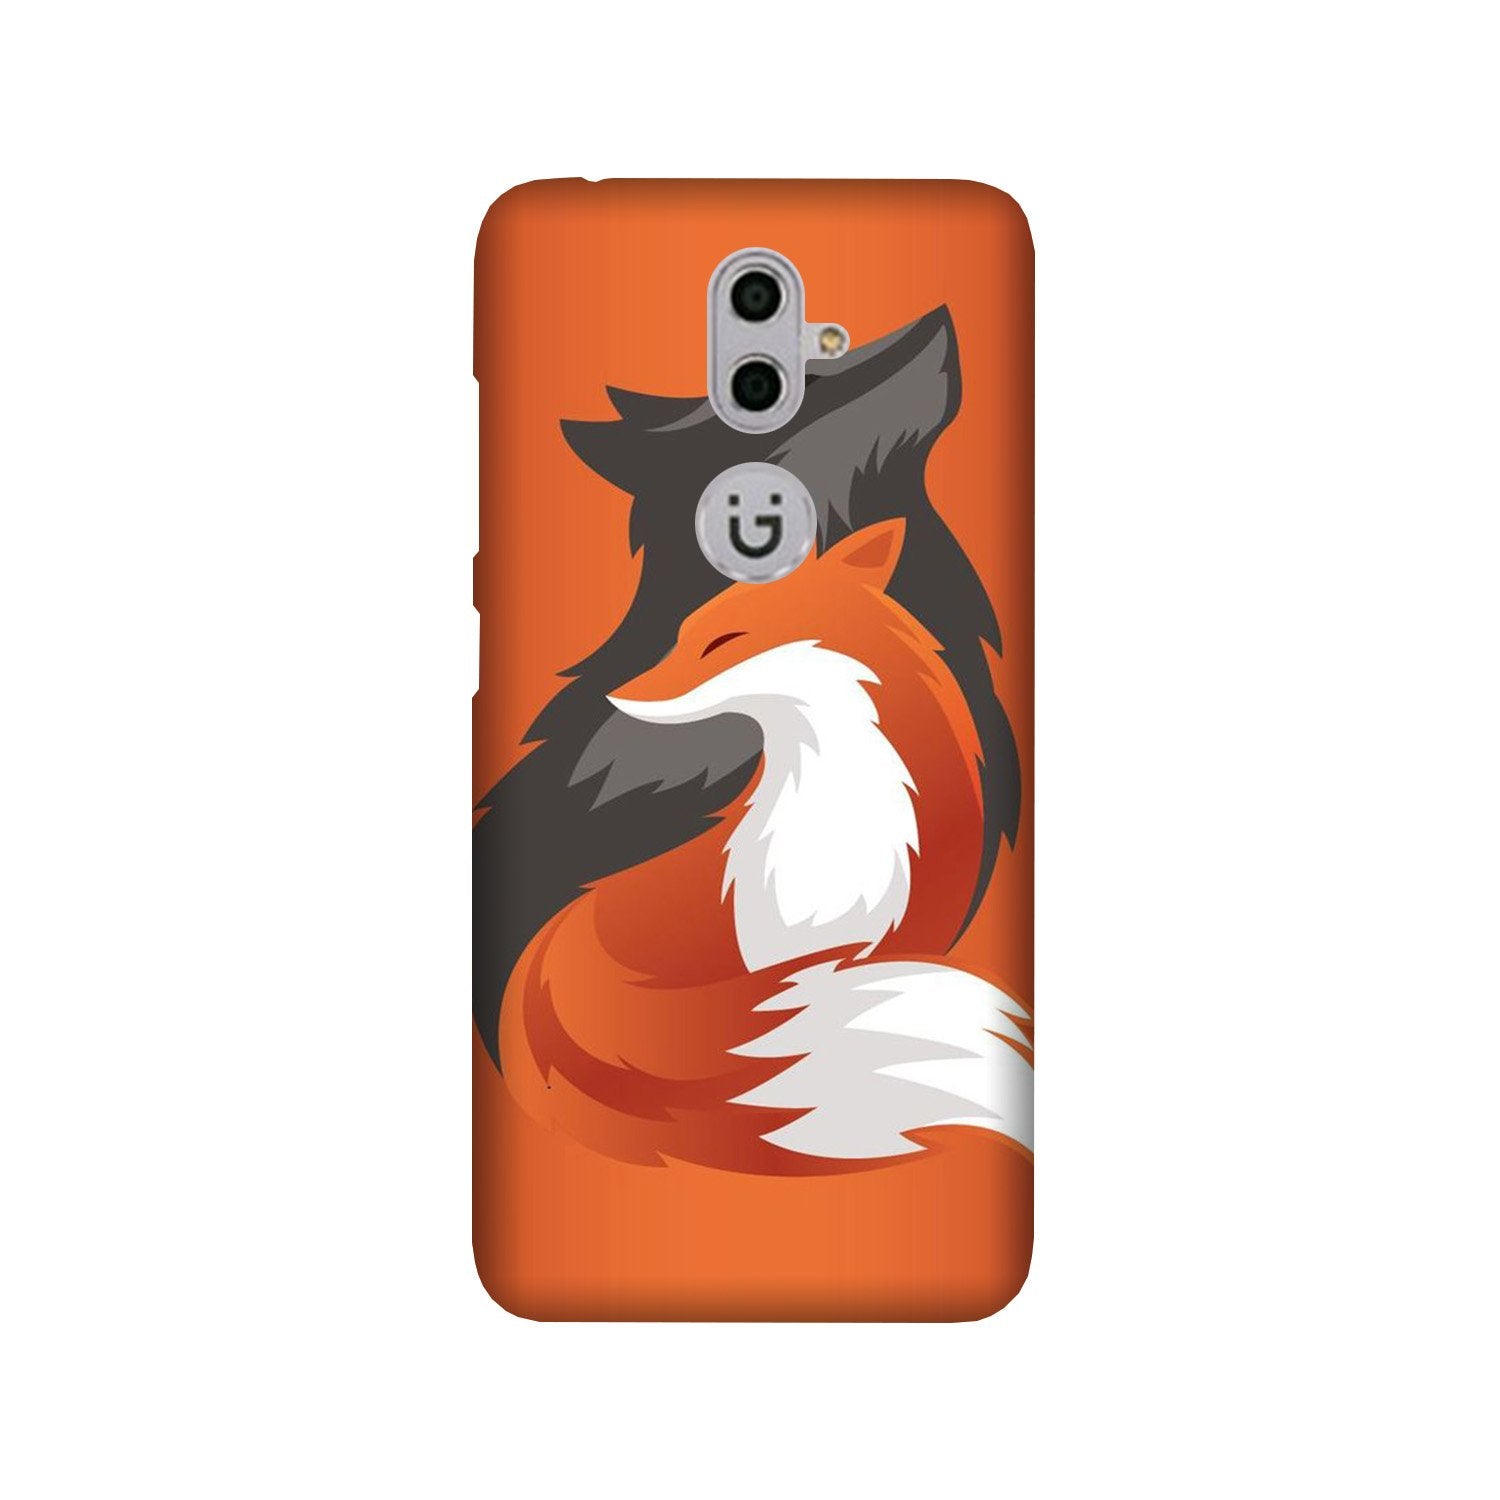 WolfCase for Gionee S9 (Design No. 224)